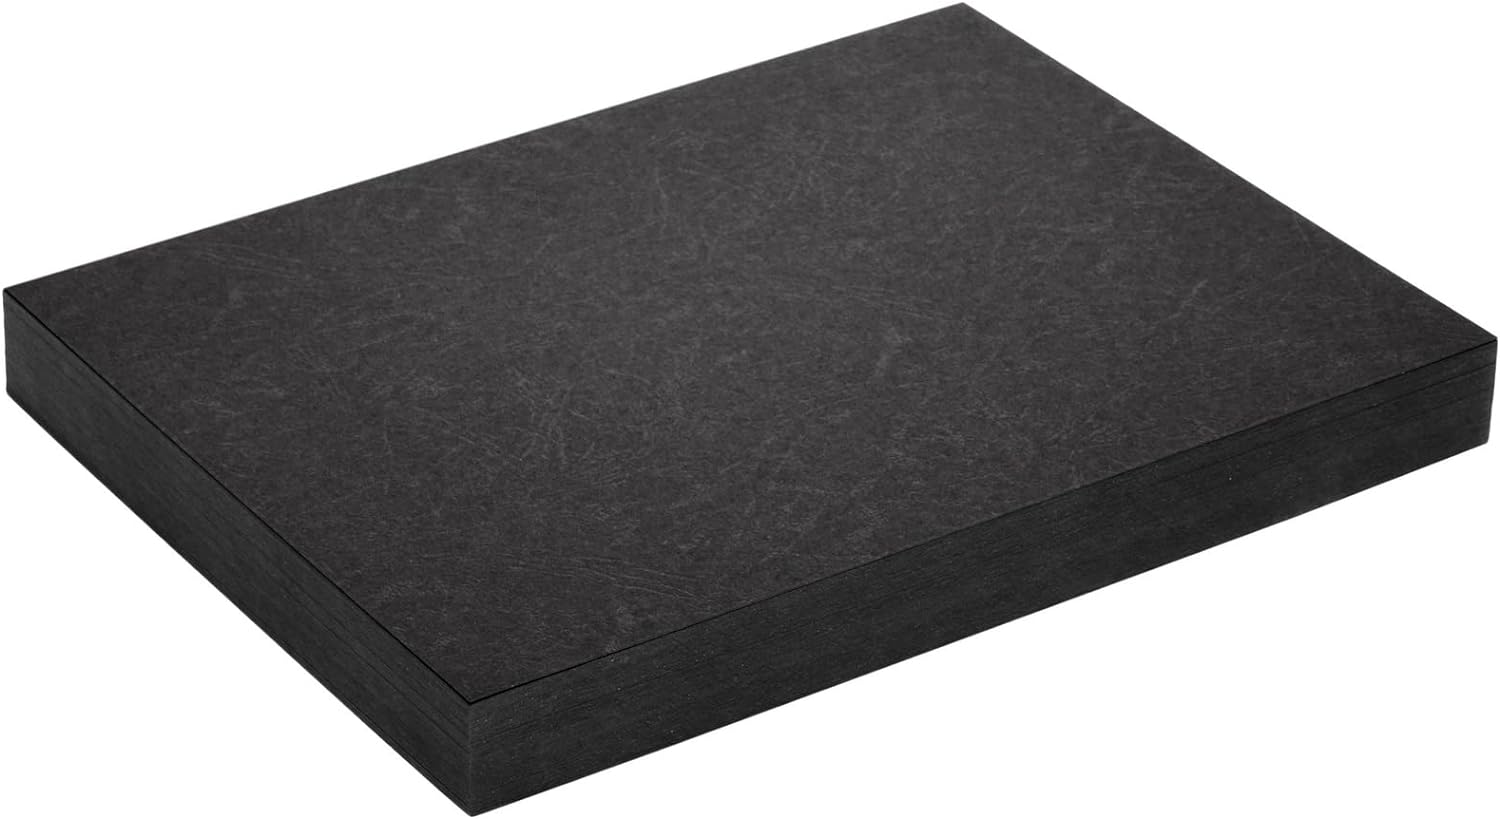 100 Pack Black 13 Mil Presentation Binding Covers and Backs (8.5x11 in)